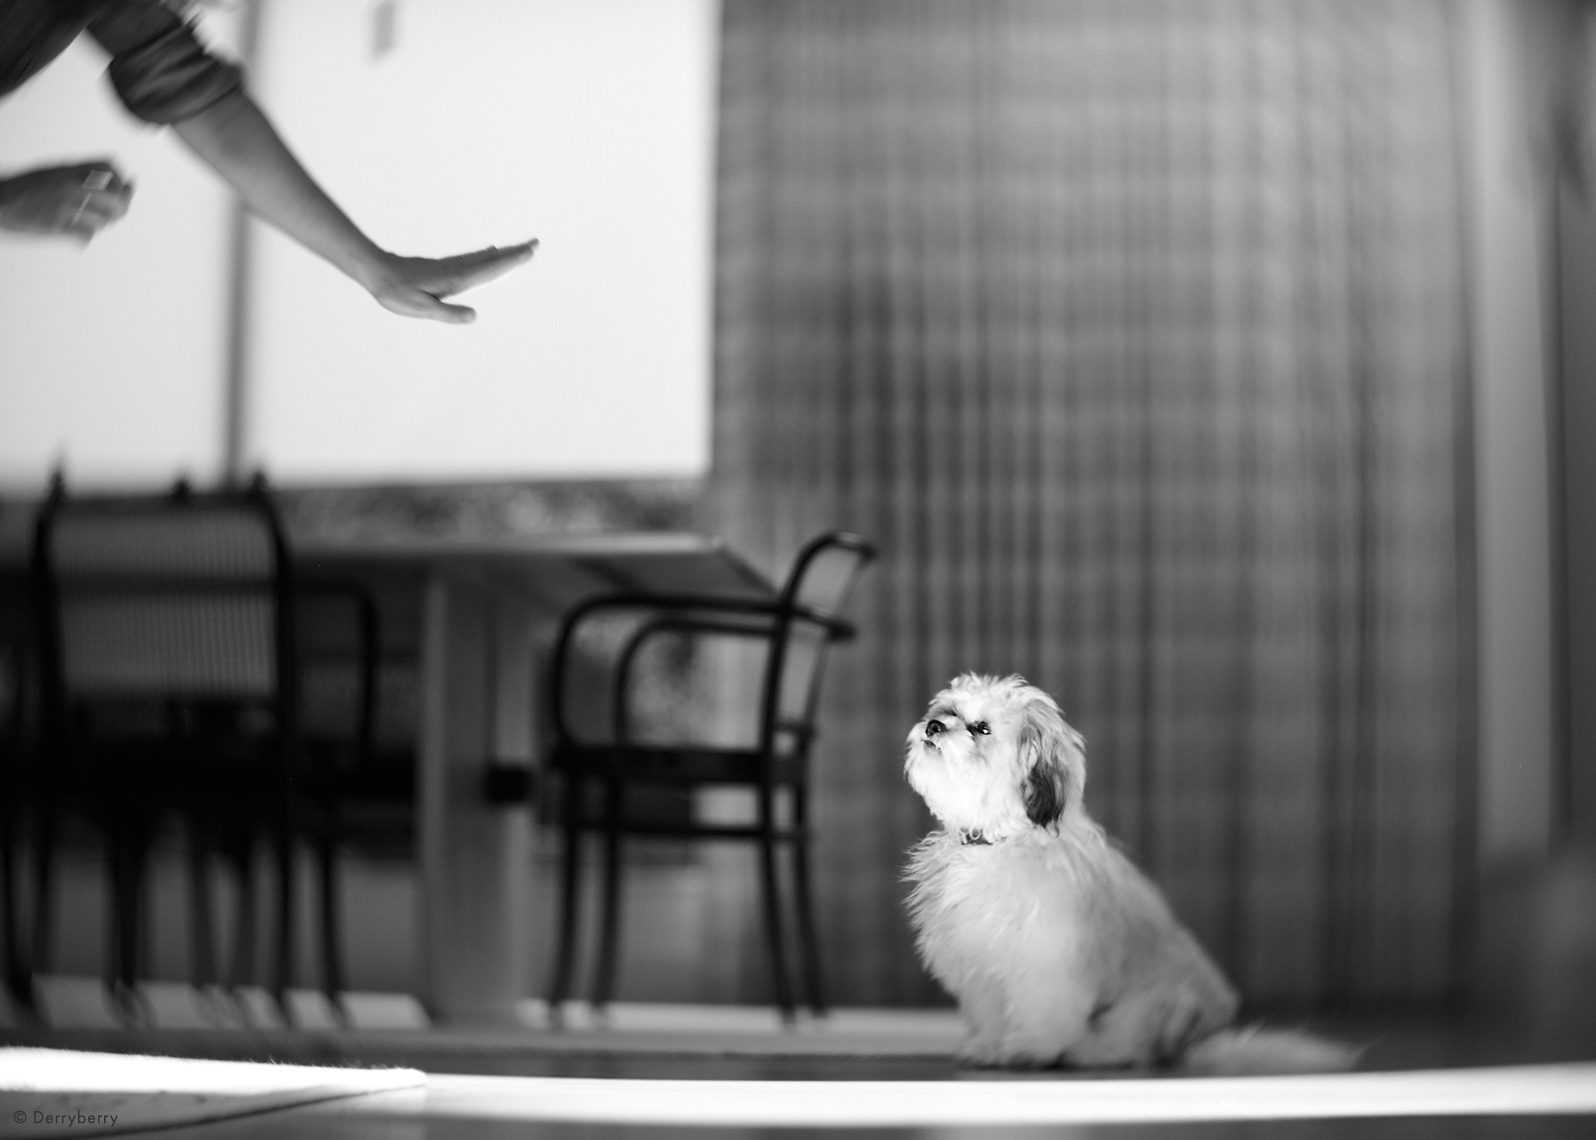 Humorous b&w photograph of dog seated on dining room floor and looking at owners hand command